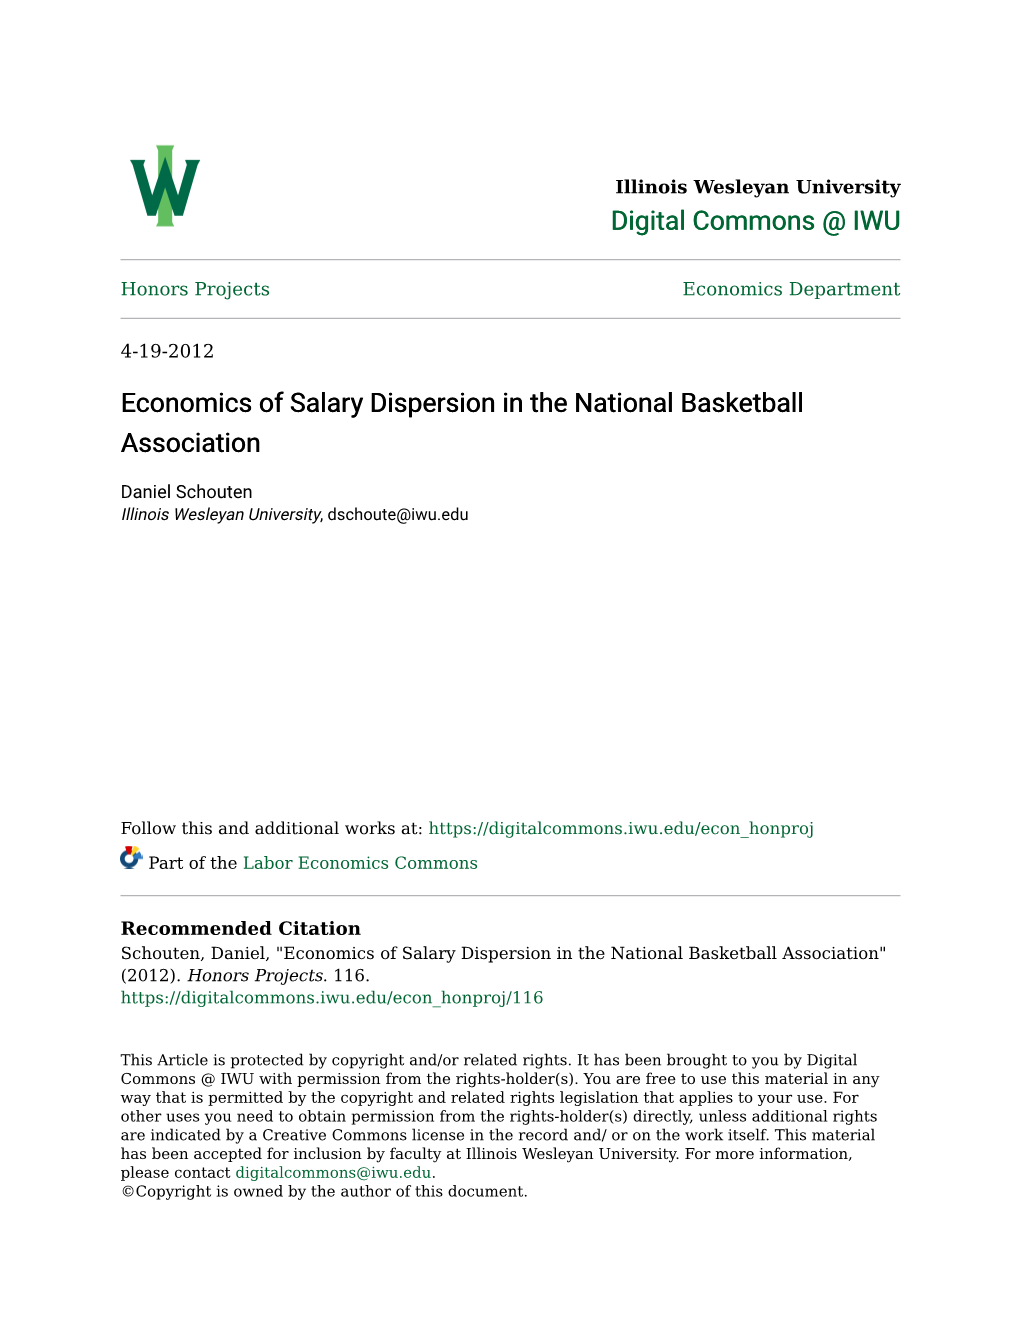 Economics of Salary Dispersion in the National Basketball Association